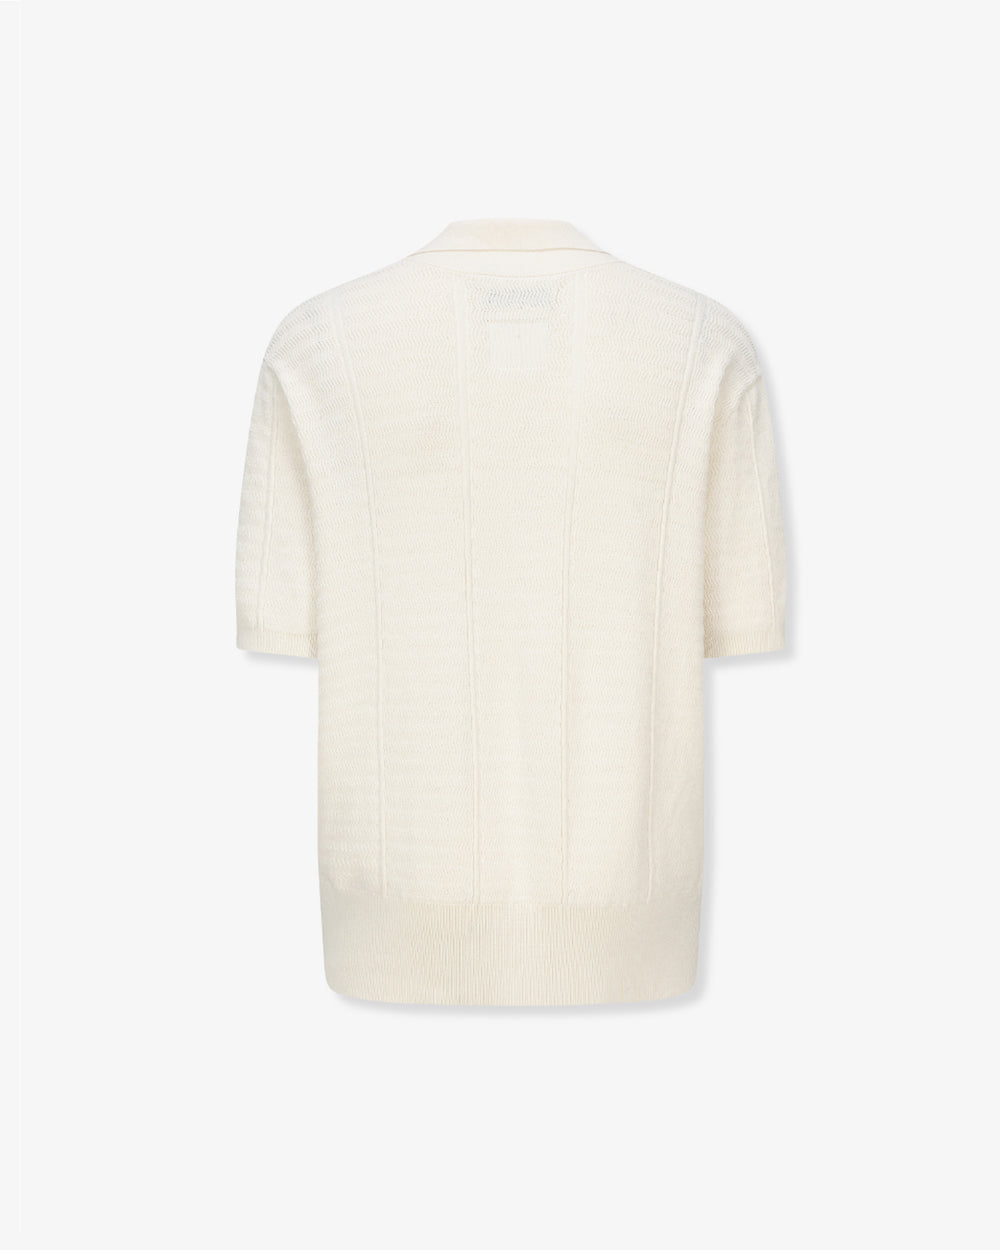 Mesh Panelled Shoulder SS Knitted Polo